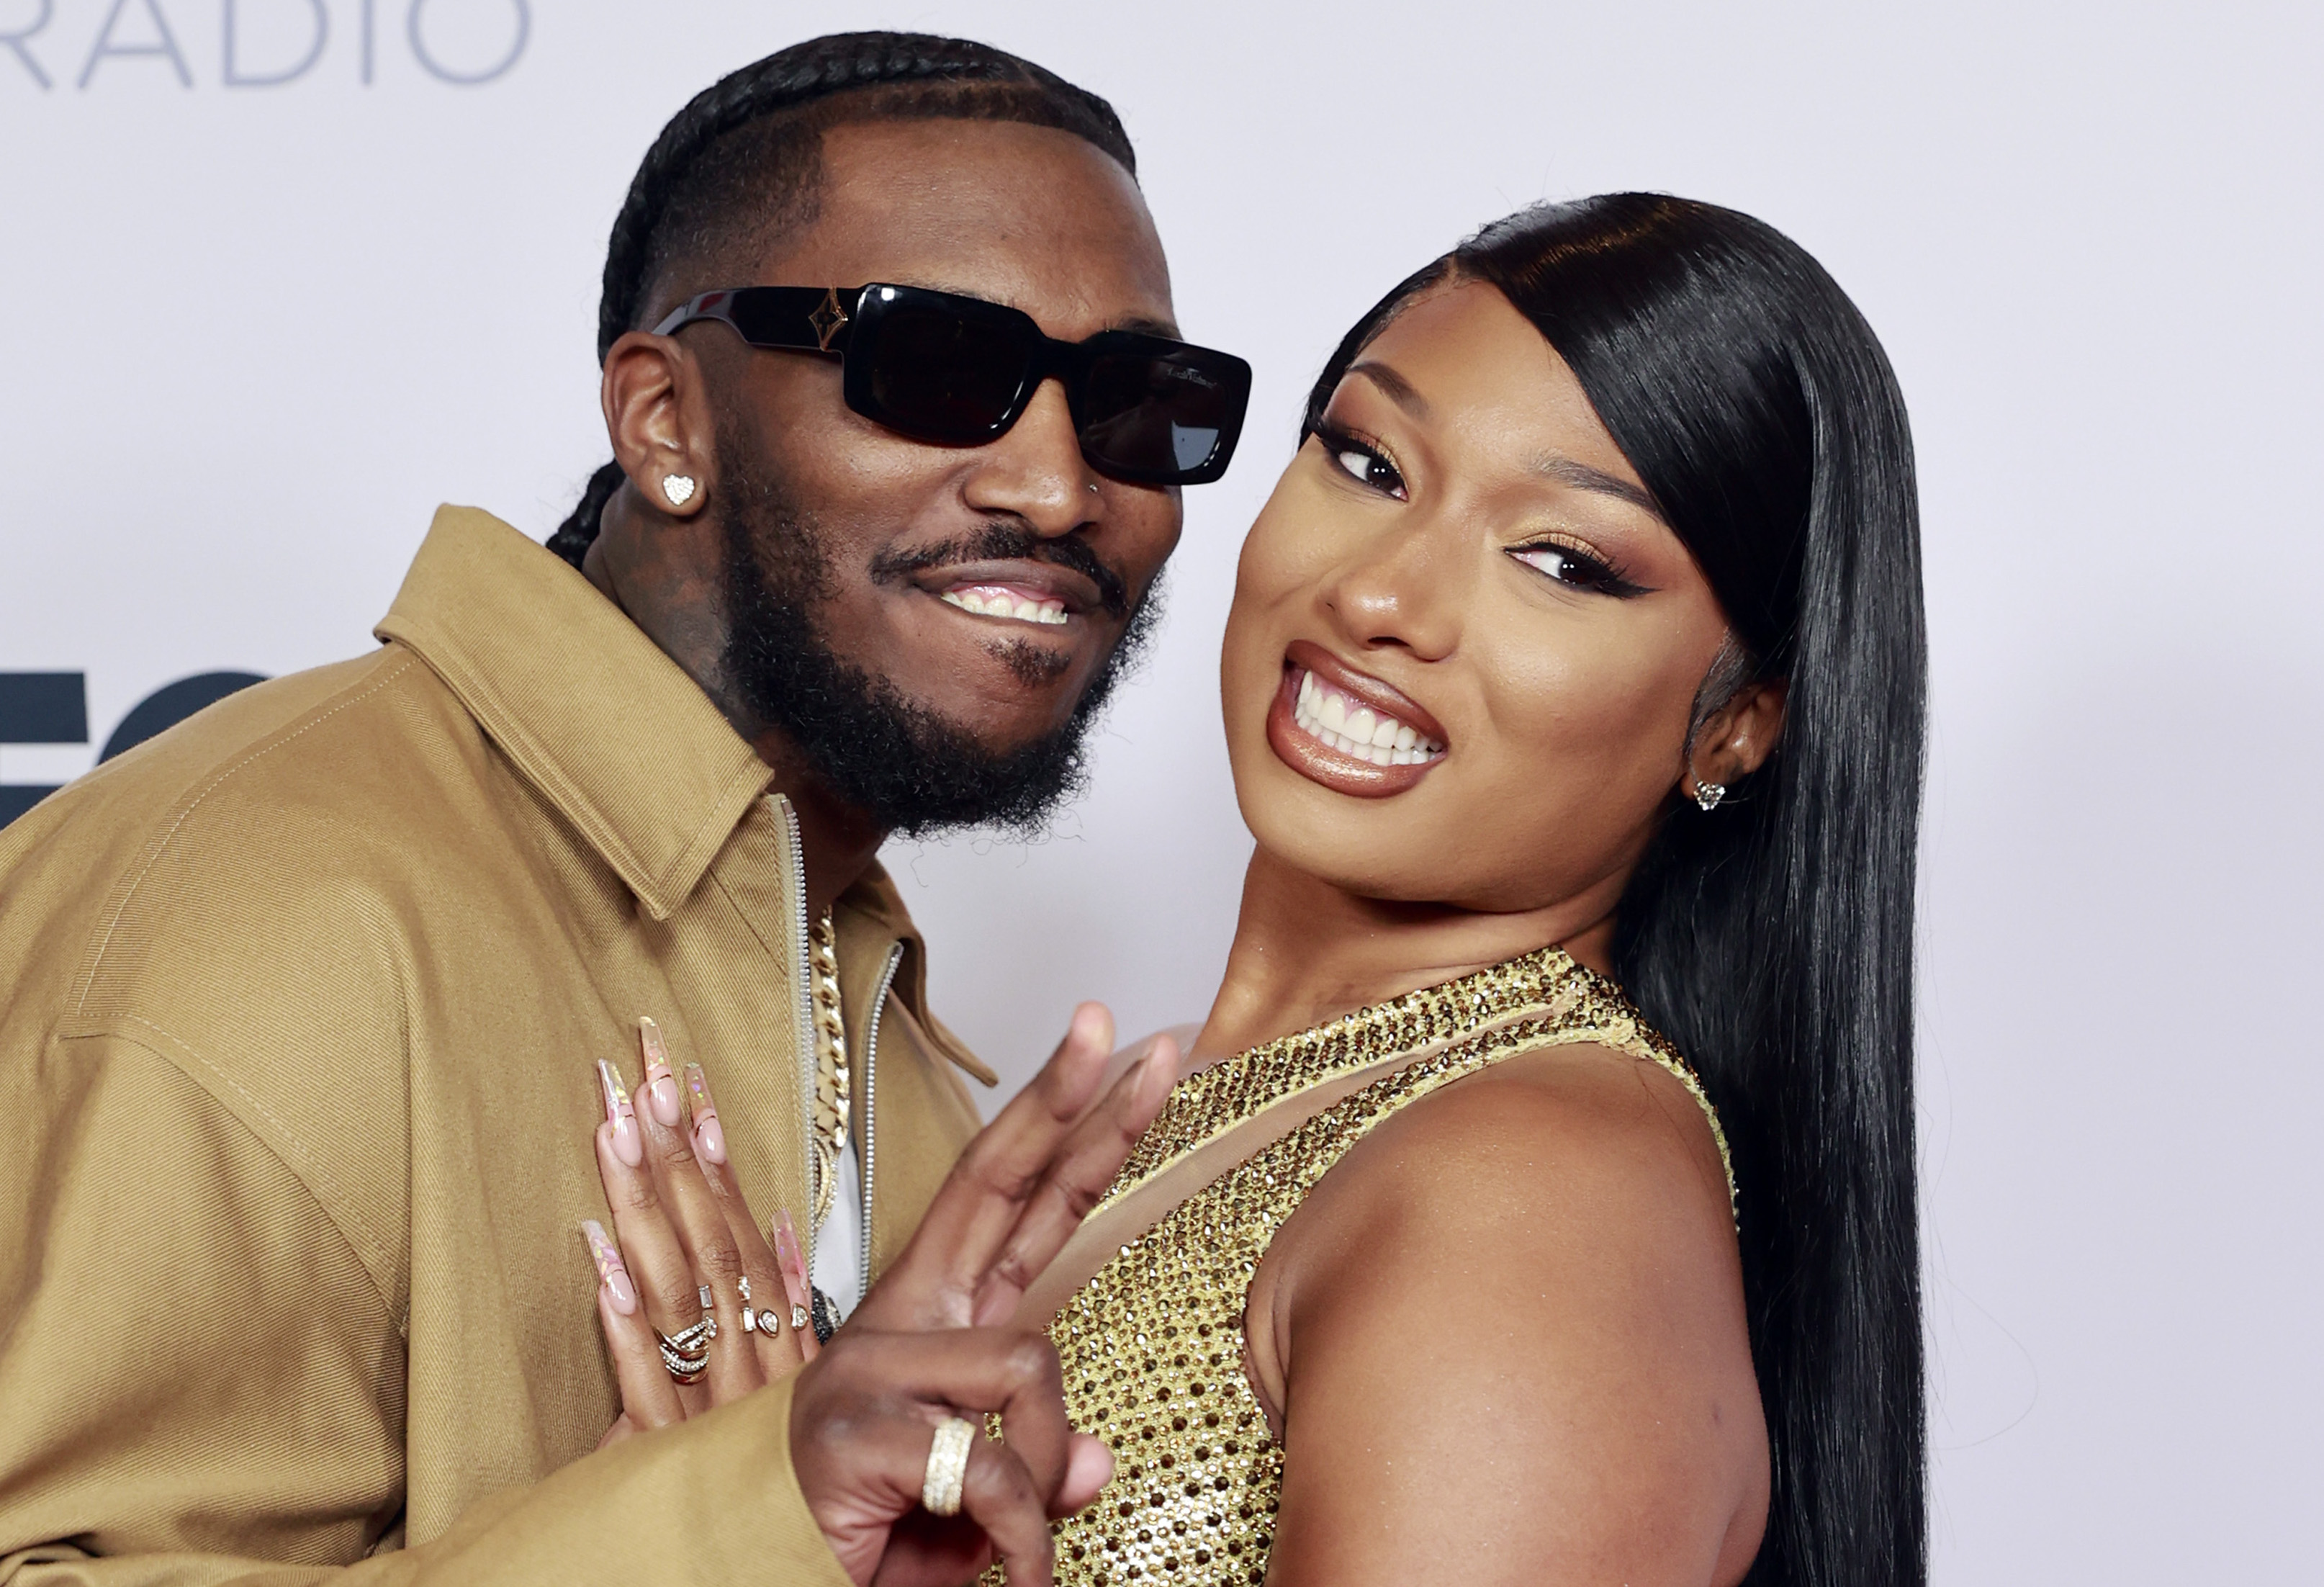 Fans DRAG Megan Thee Stallion’s Ex For Allegedly Cheating